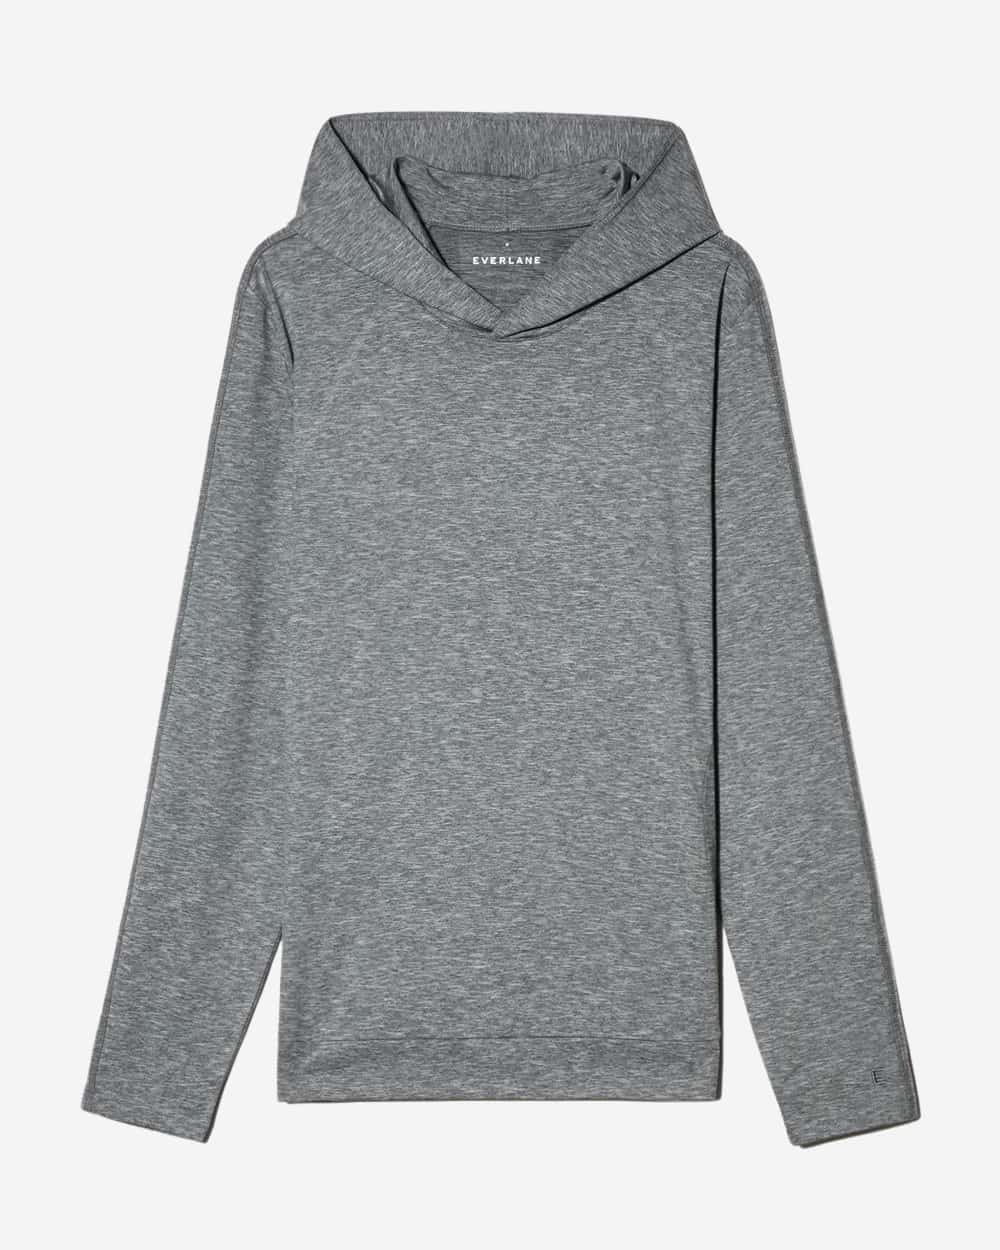 18 Lightweight Hoodie Brands Making Thin, Breathable Sweats